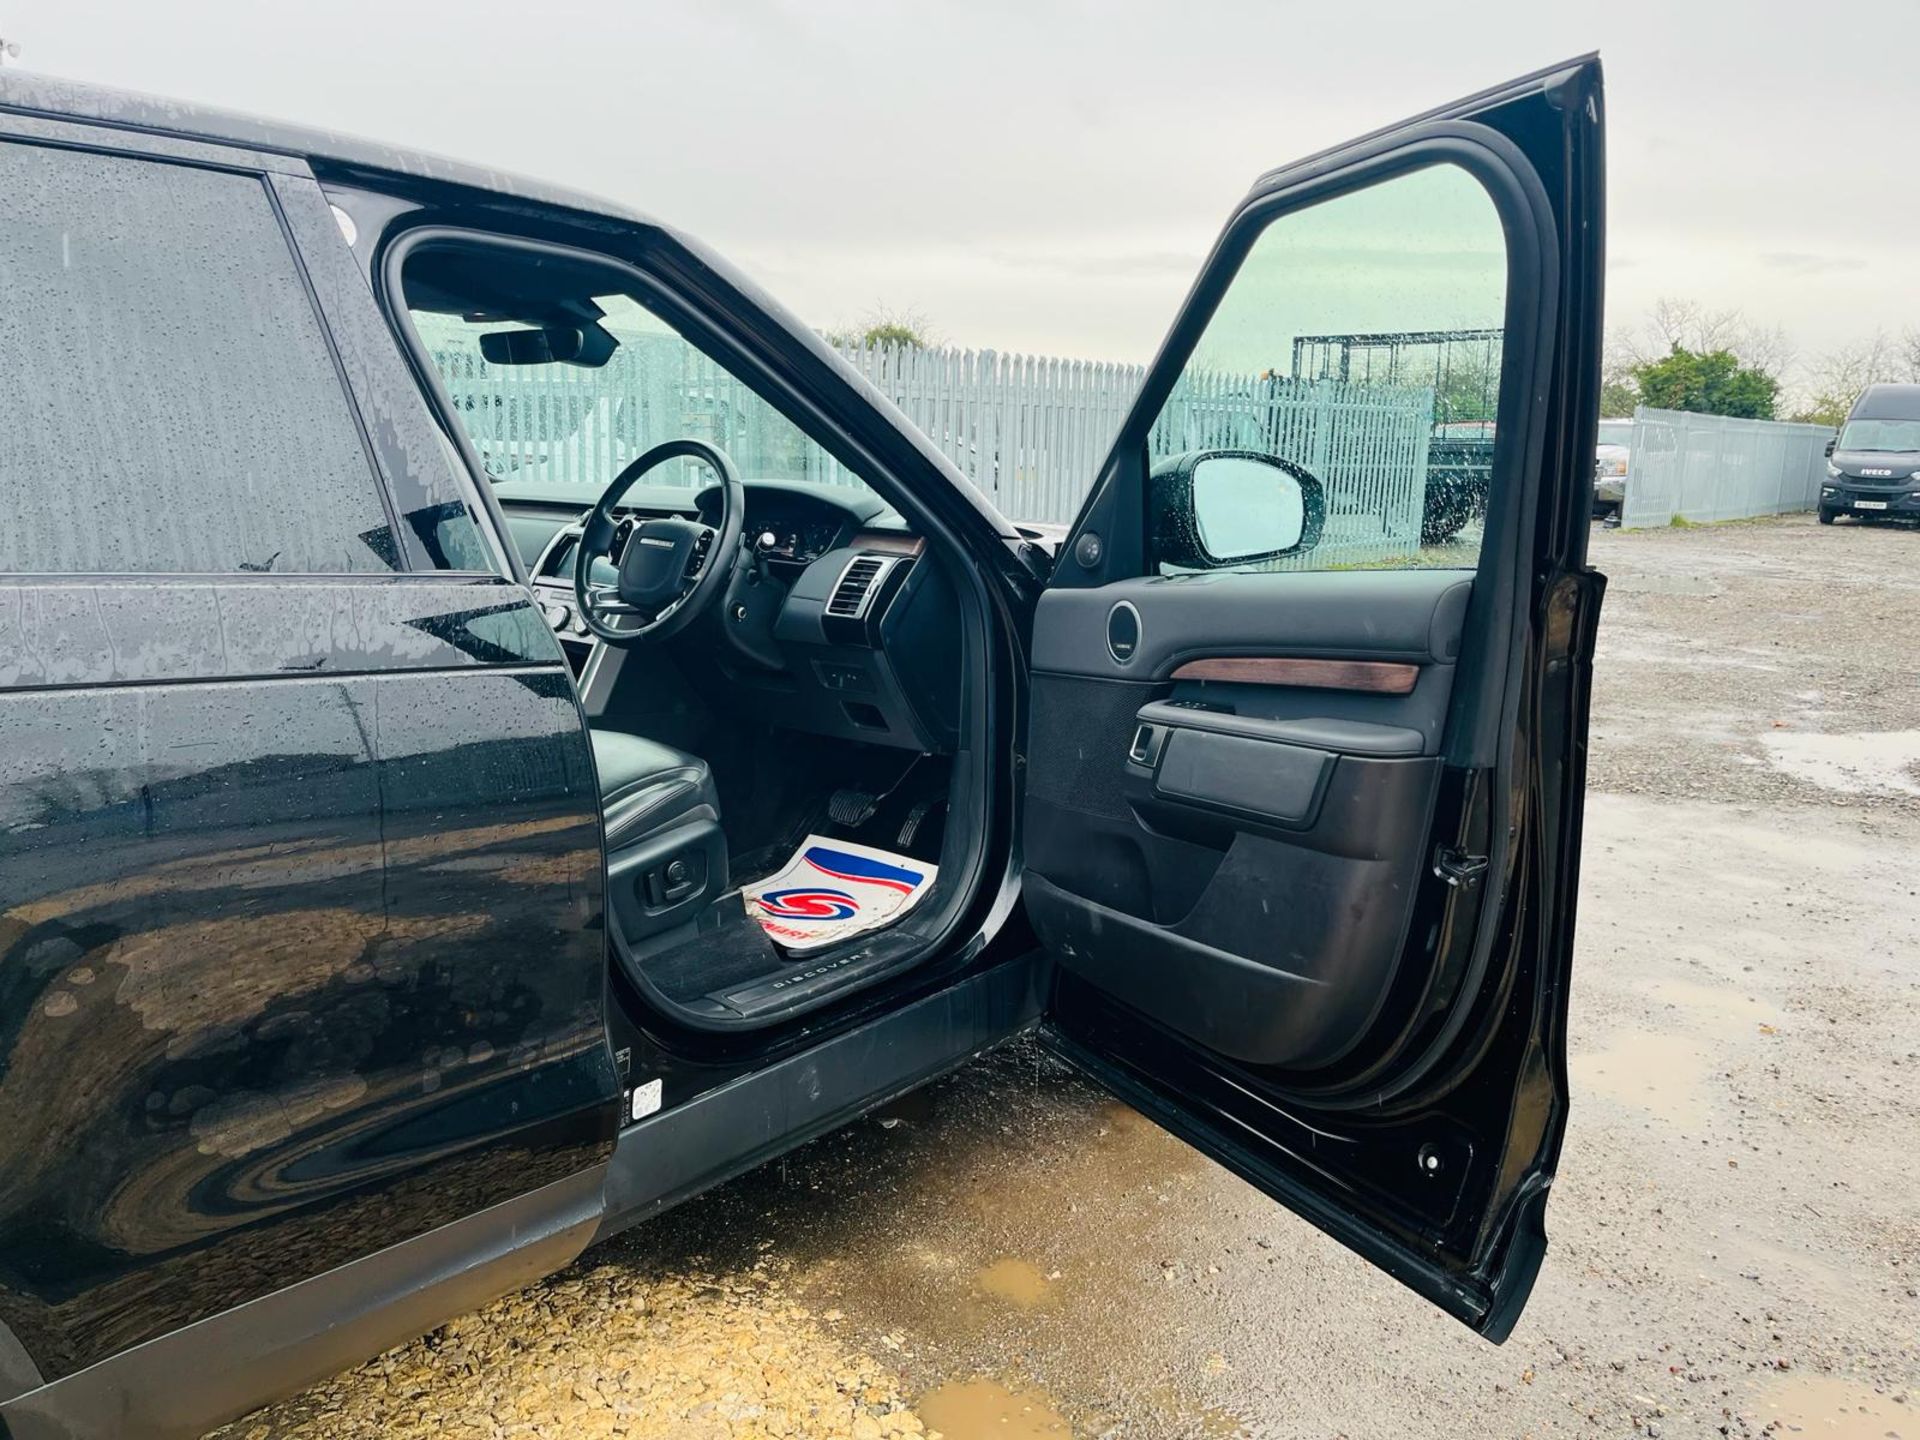 ** ON SALE ** Land Rover Discovery SD4 HSE Edition 4WD Auto 2019 '19 Reg' Commercial - Sat Nav - A/C - Image 13 of 33